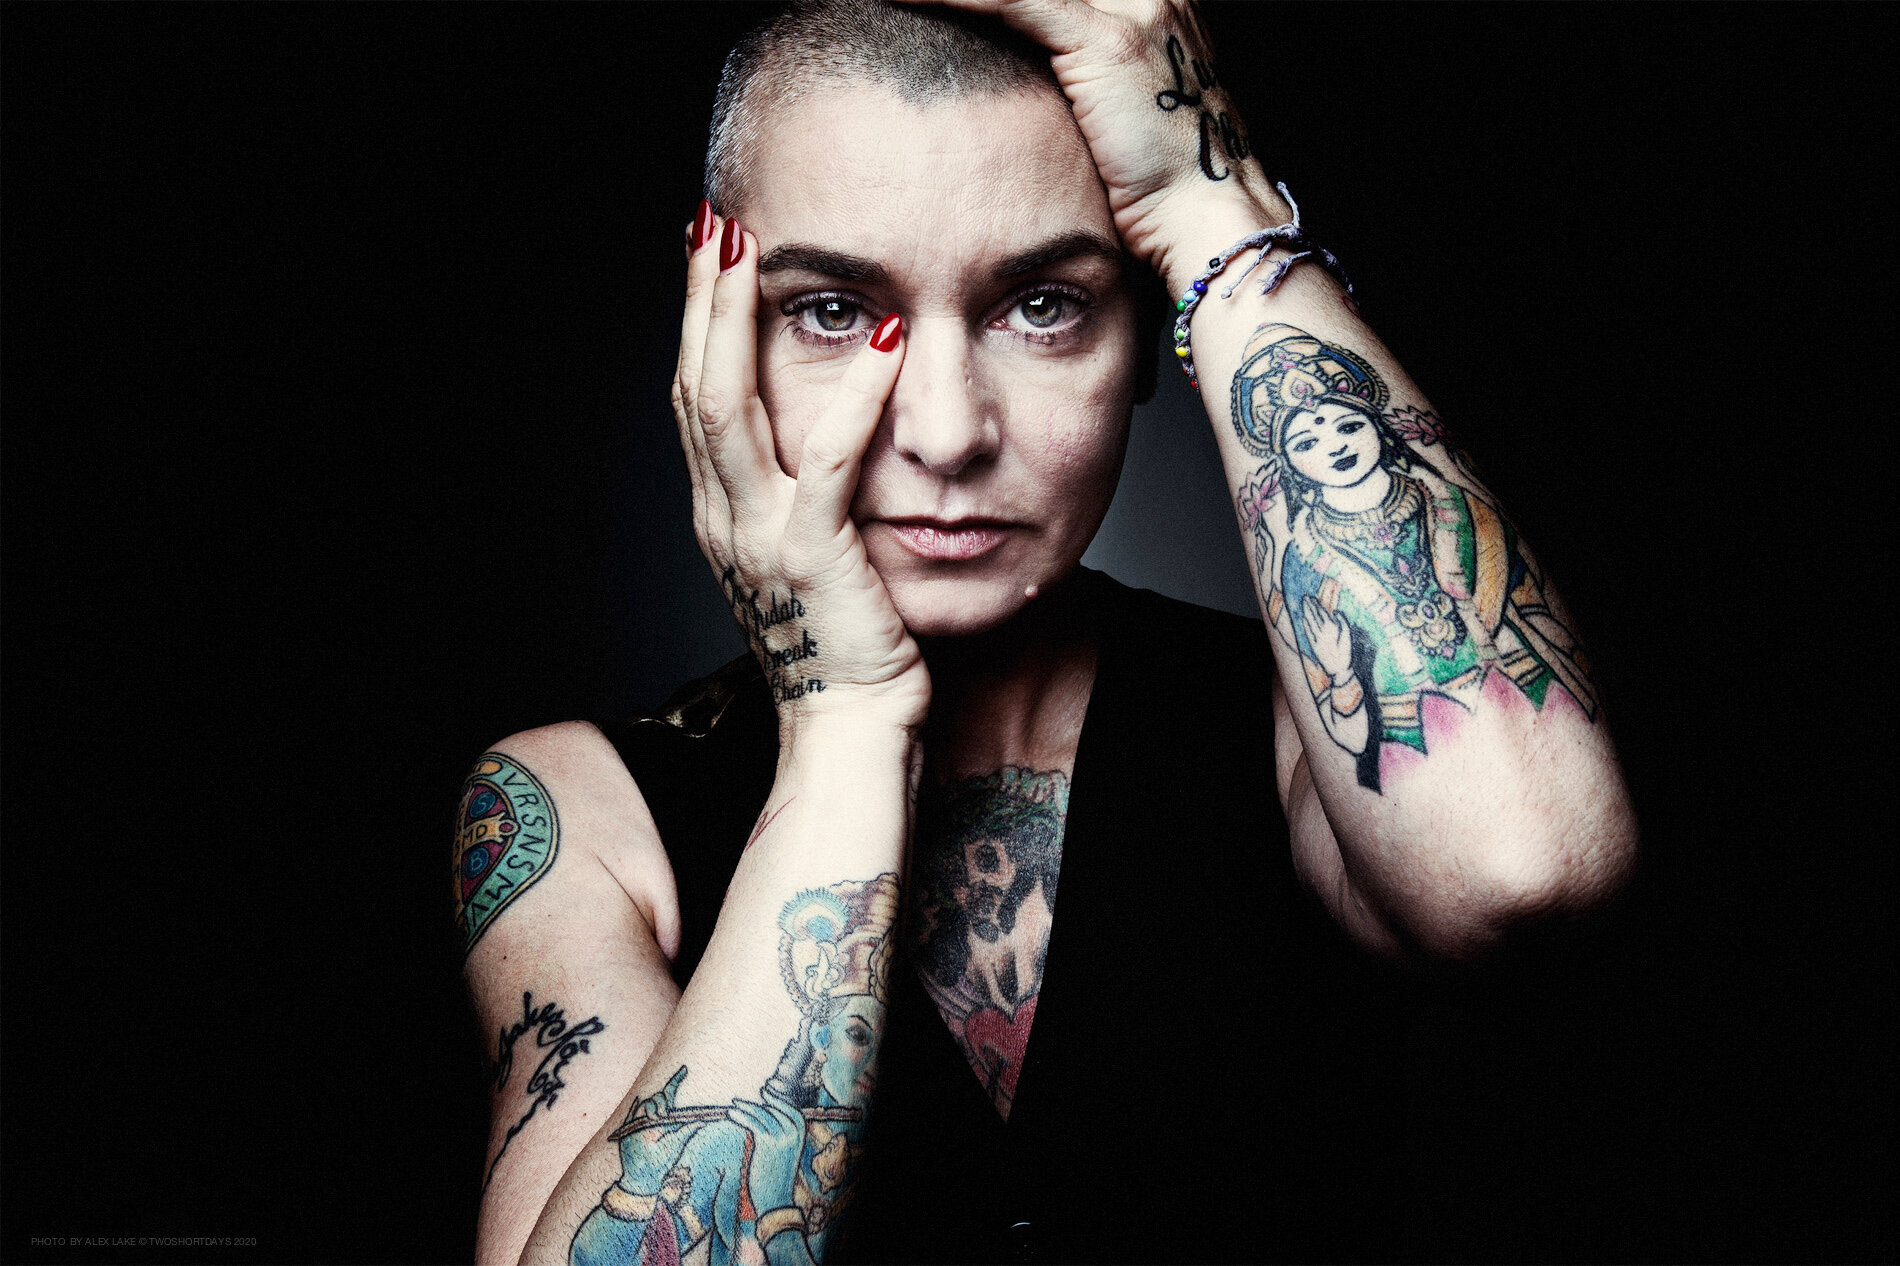 sinead_o_connor_photography_copyright_ALEX_LAKE_do_not_reproduce_without_permission_TWOSHORTDAYS.jpg